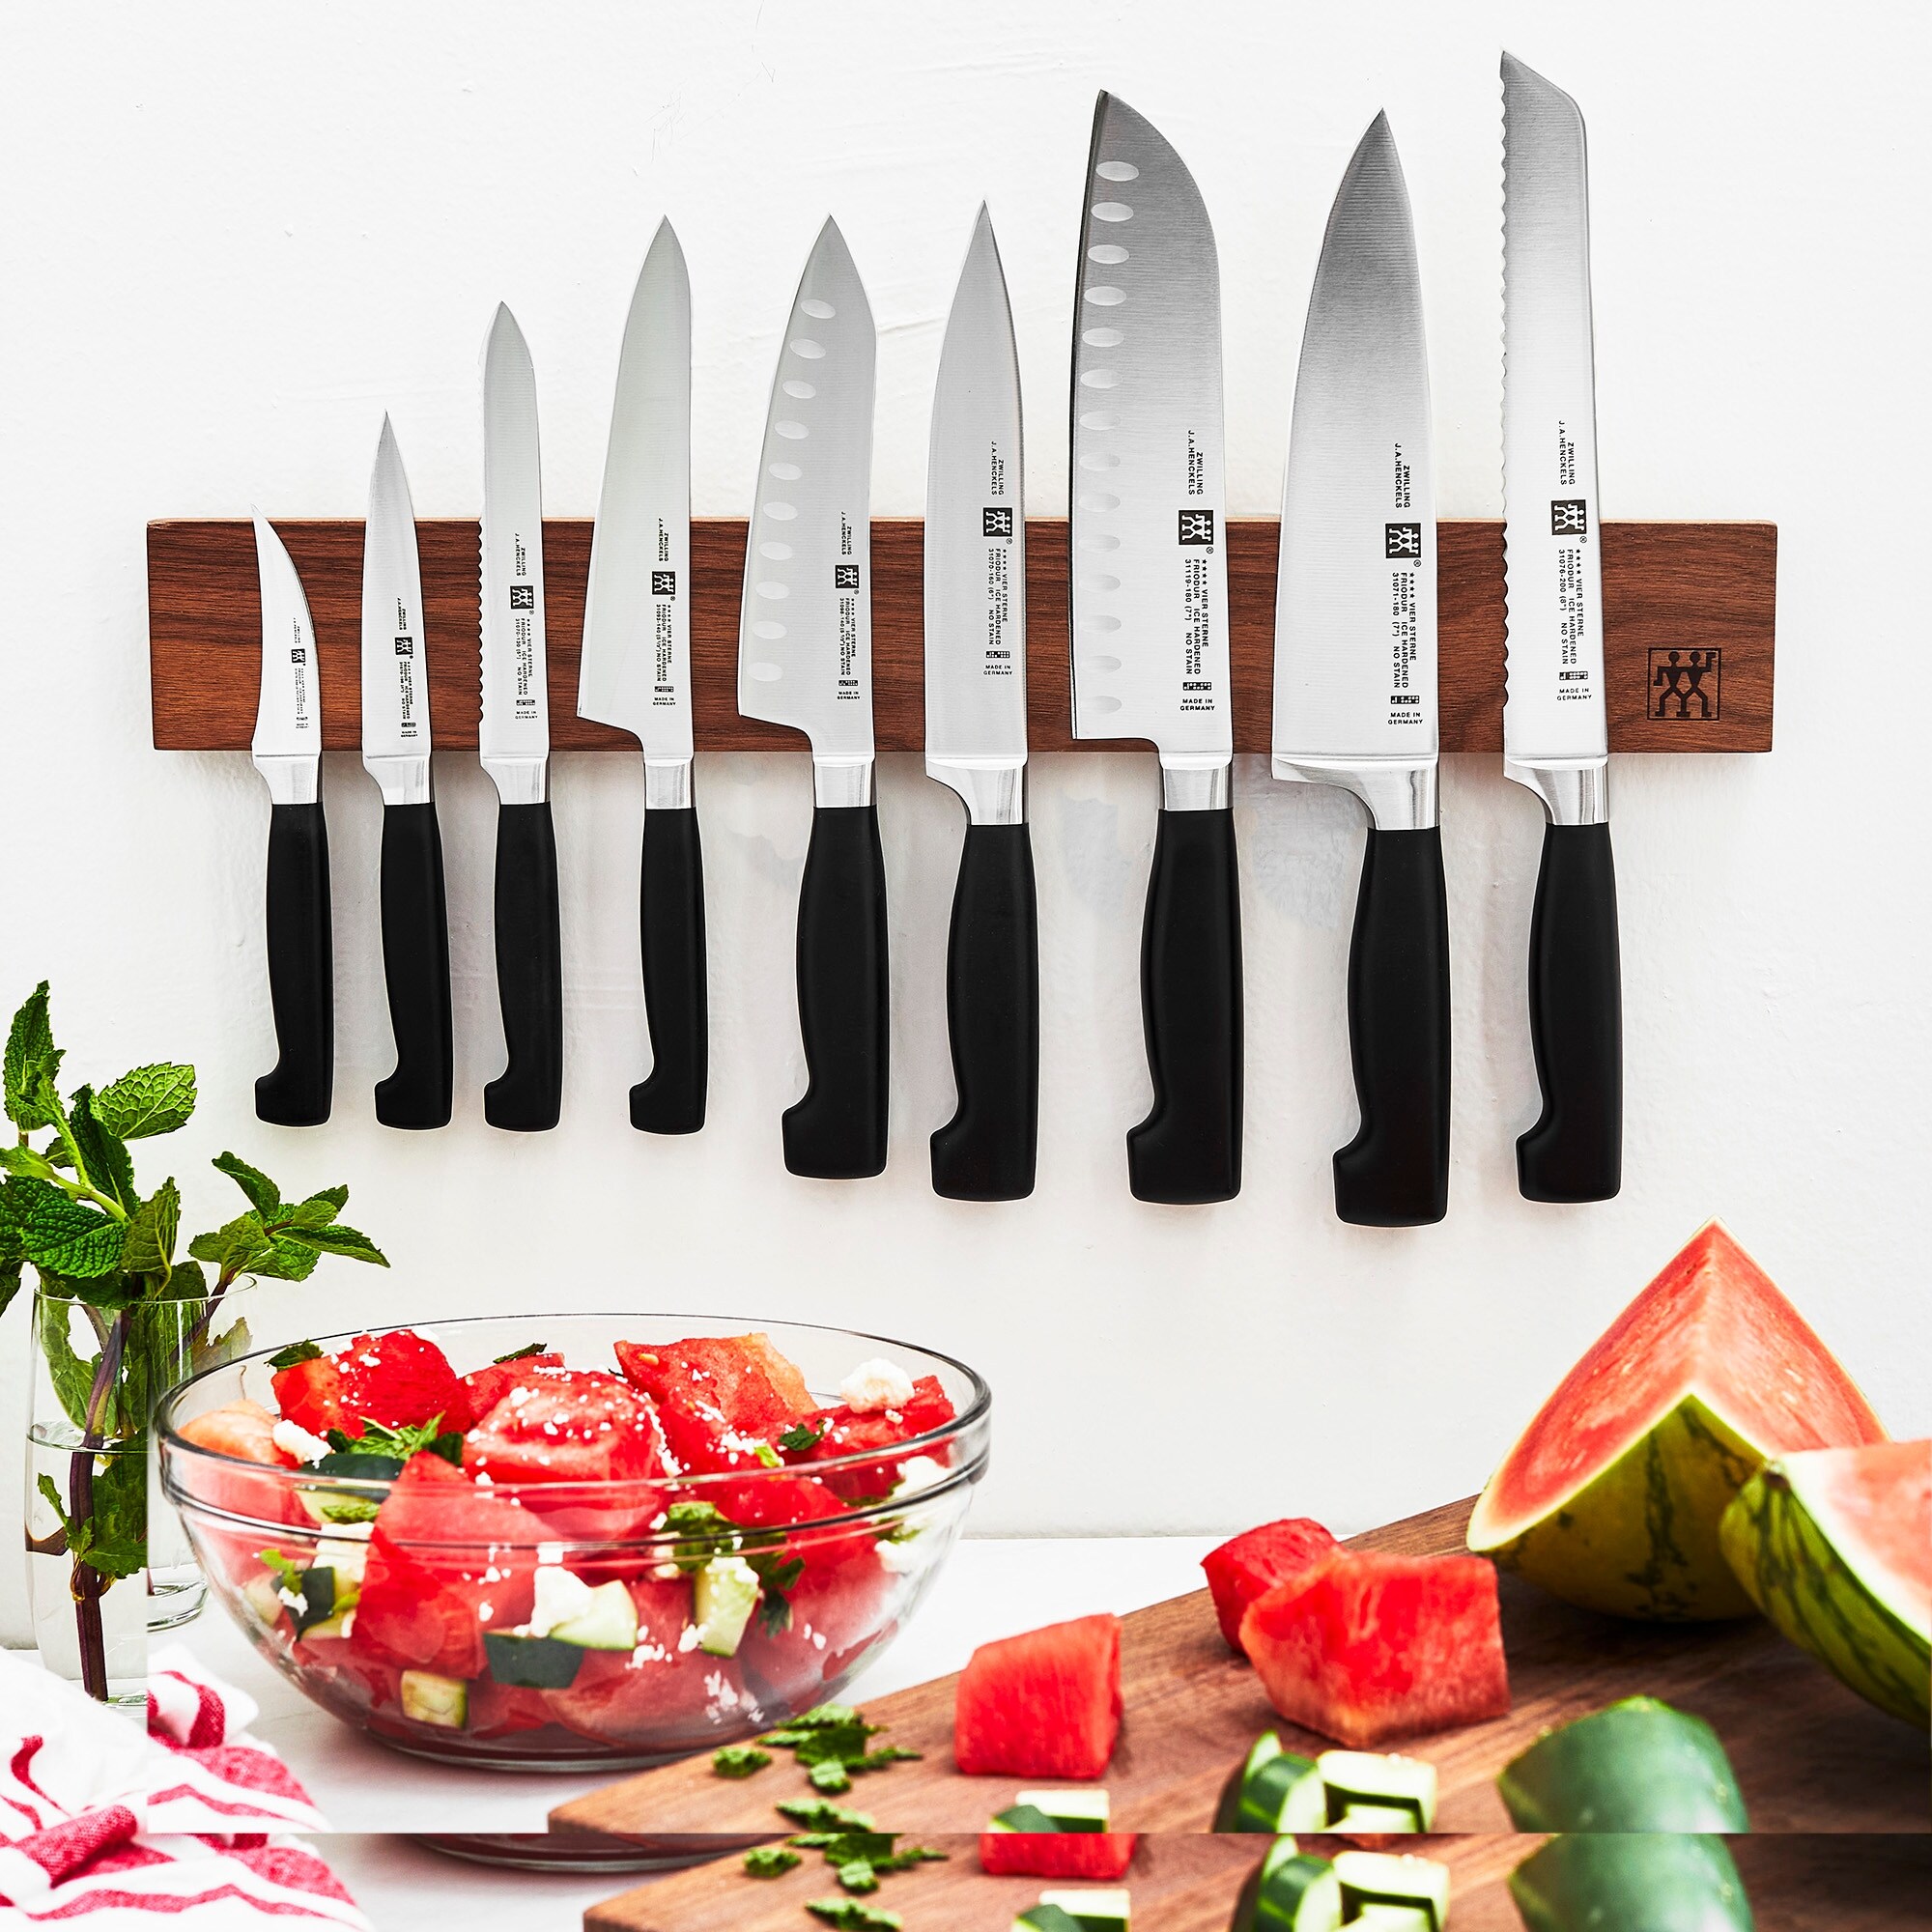 https://ak1.ostkcdn.com/images/products/is/images/direct/1fb26d2b734511fd24e54d8fface438399a17cc1/ZWILLING-Four-Star-Chef%27s-Knife.jpg